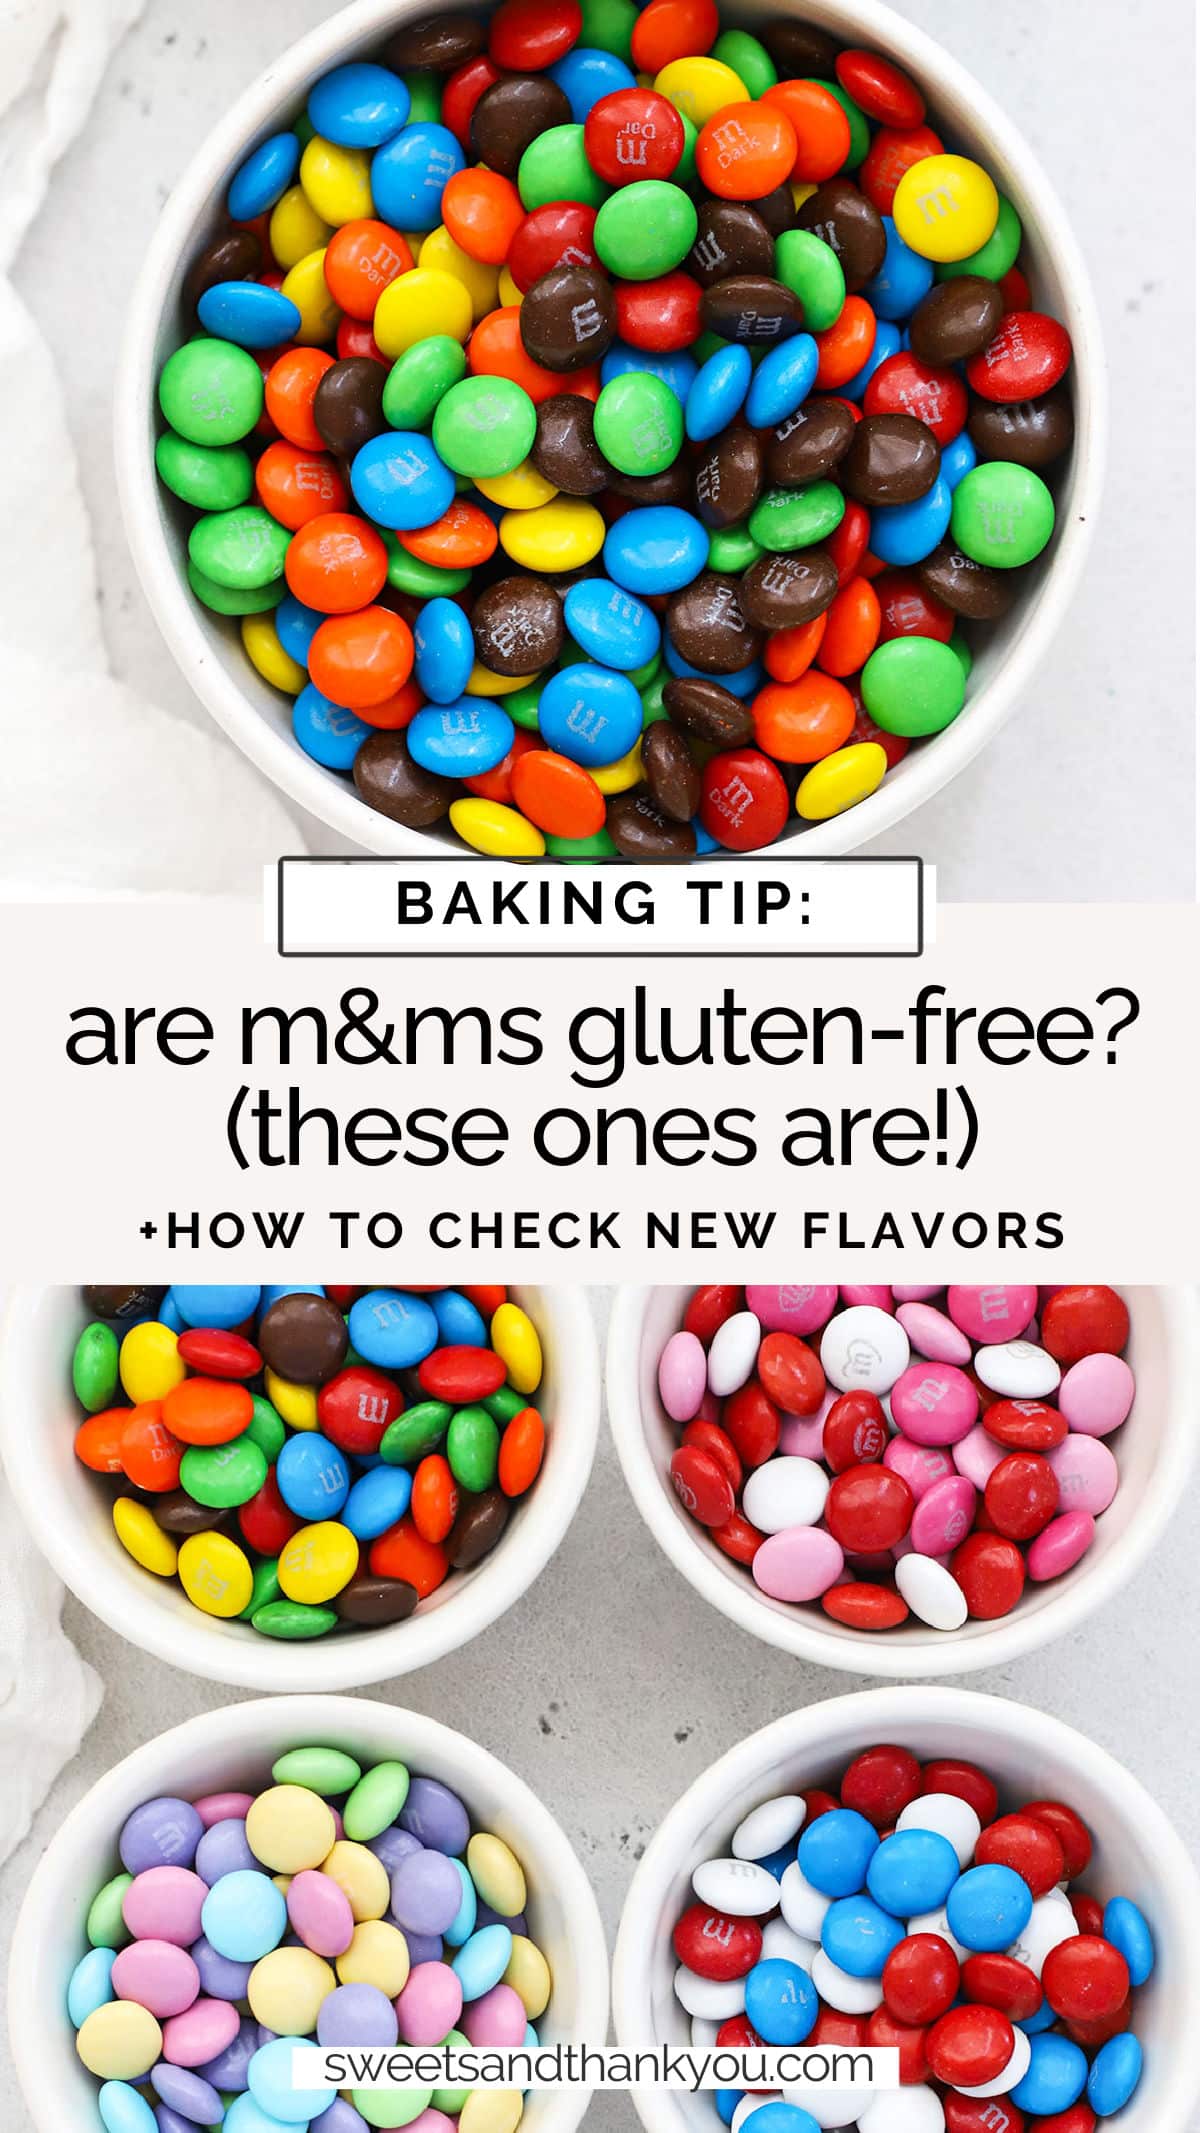 Are M&Ms Gluten-Free? - Many varieties of M&Ms ARE Gluten-Free! Here's everything you need to know about finding gluten-free M&Ms. / which m&ms are gluten-free / what flavors of m&ms are gluten-free / gluten-free m&ms / are peanut m&ms gluten-free / are peanut butter m&ms gluten-free / what kinds of m&ms are gluten-free / are dark chocolate m&ms gluten-free / are milk chocolate m&ms gluten-free / are crispy m&ms gluten-free / are pretzel m&ms gluten-free / are caramel m&ms gluten-free /